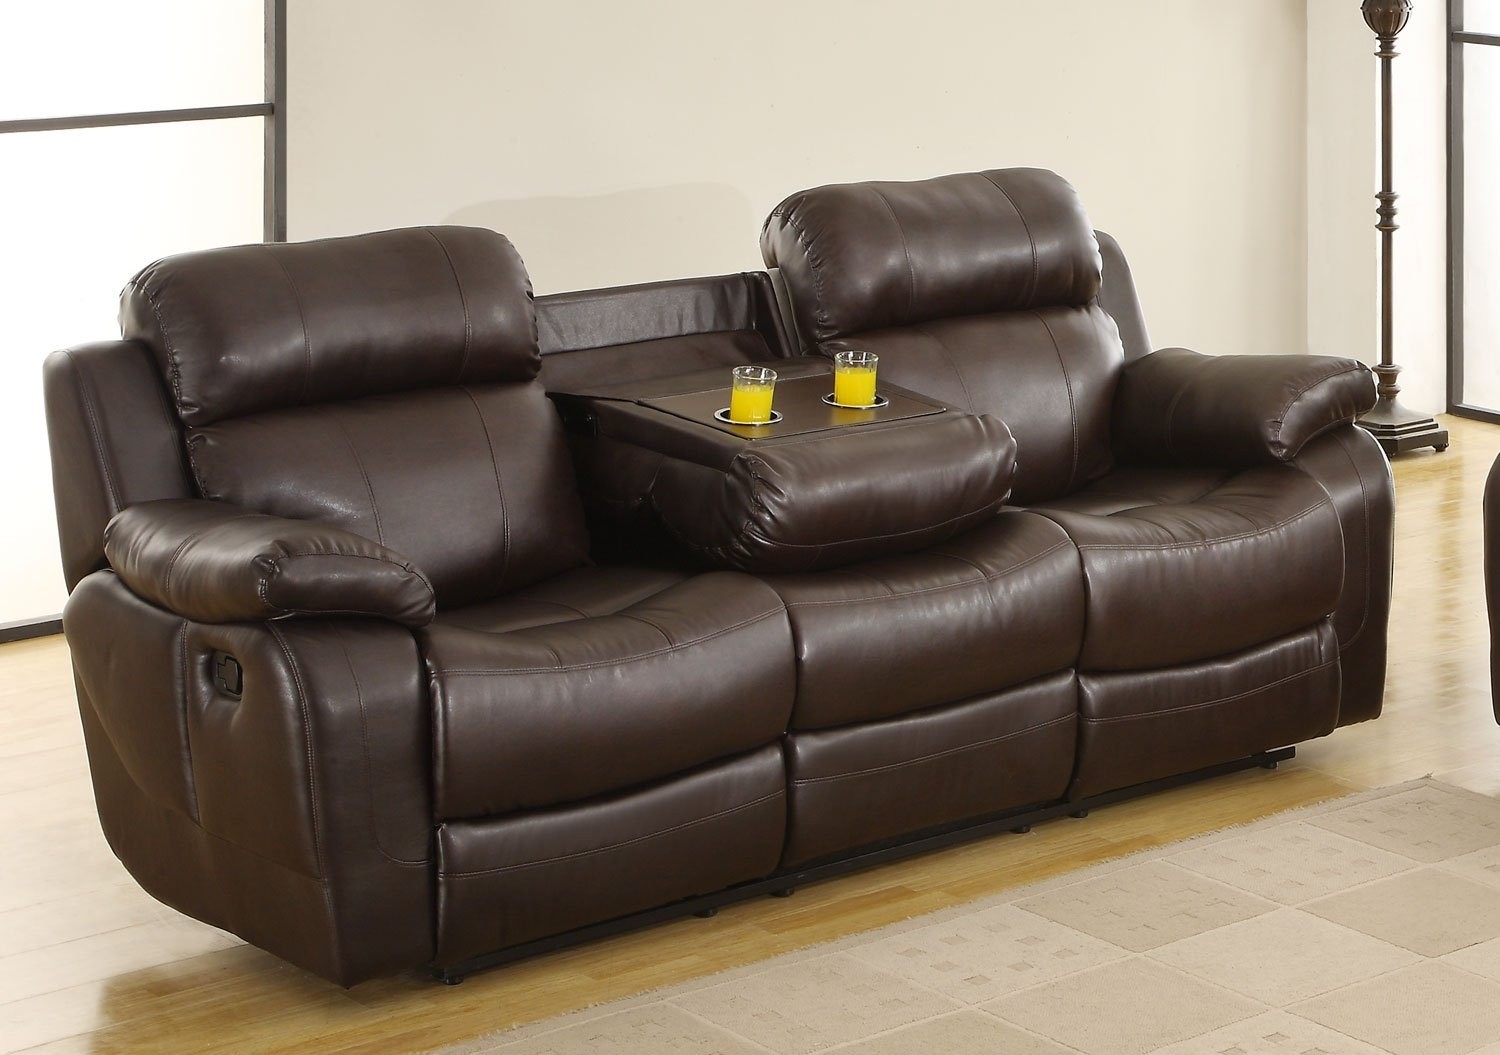 Homelegance marille dark brown double reclining sofa with